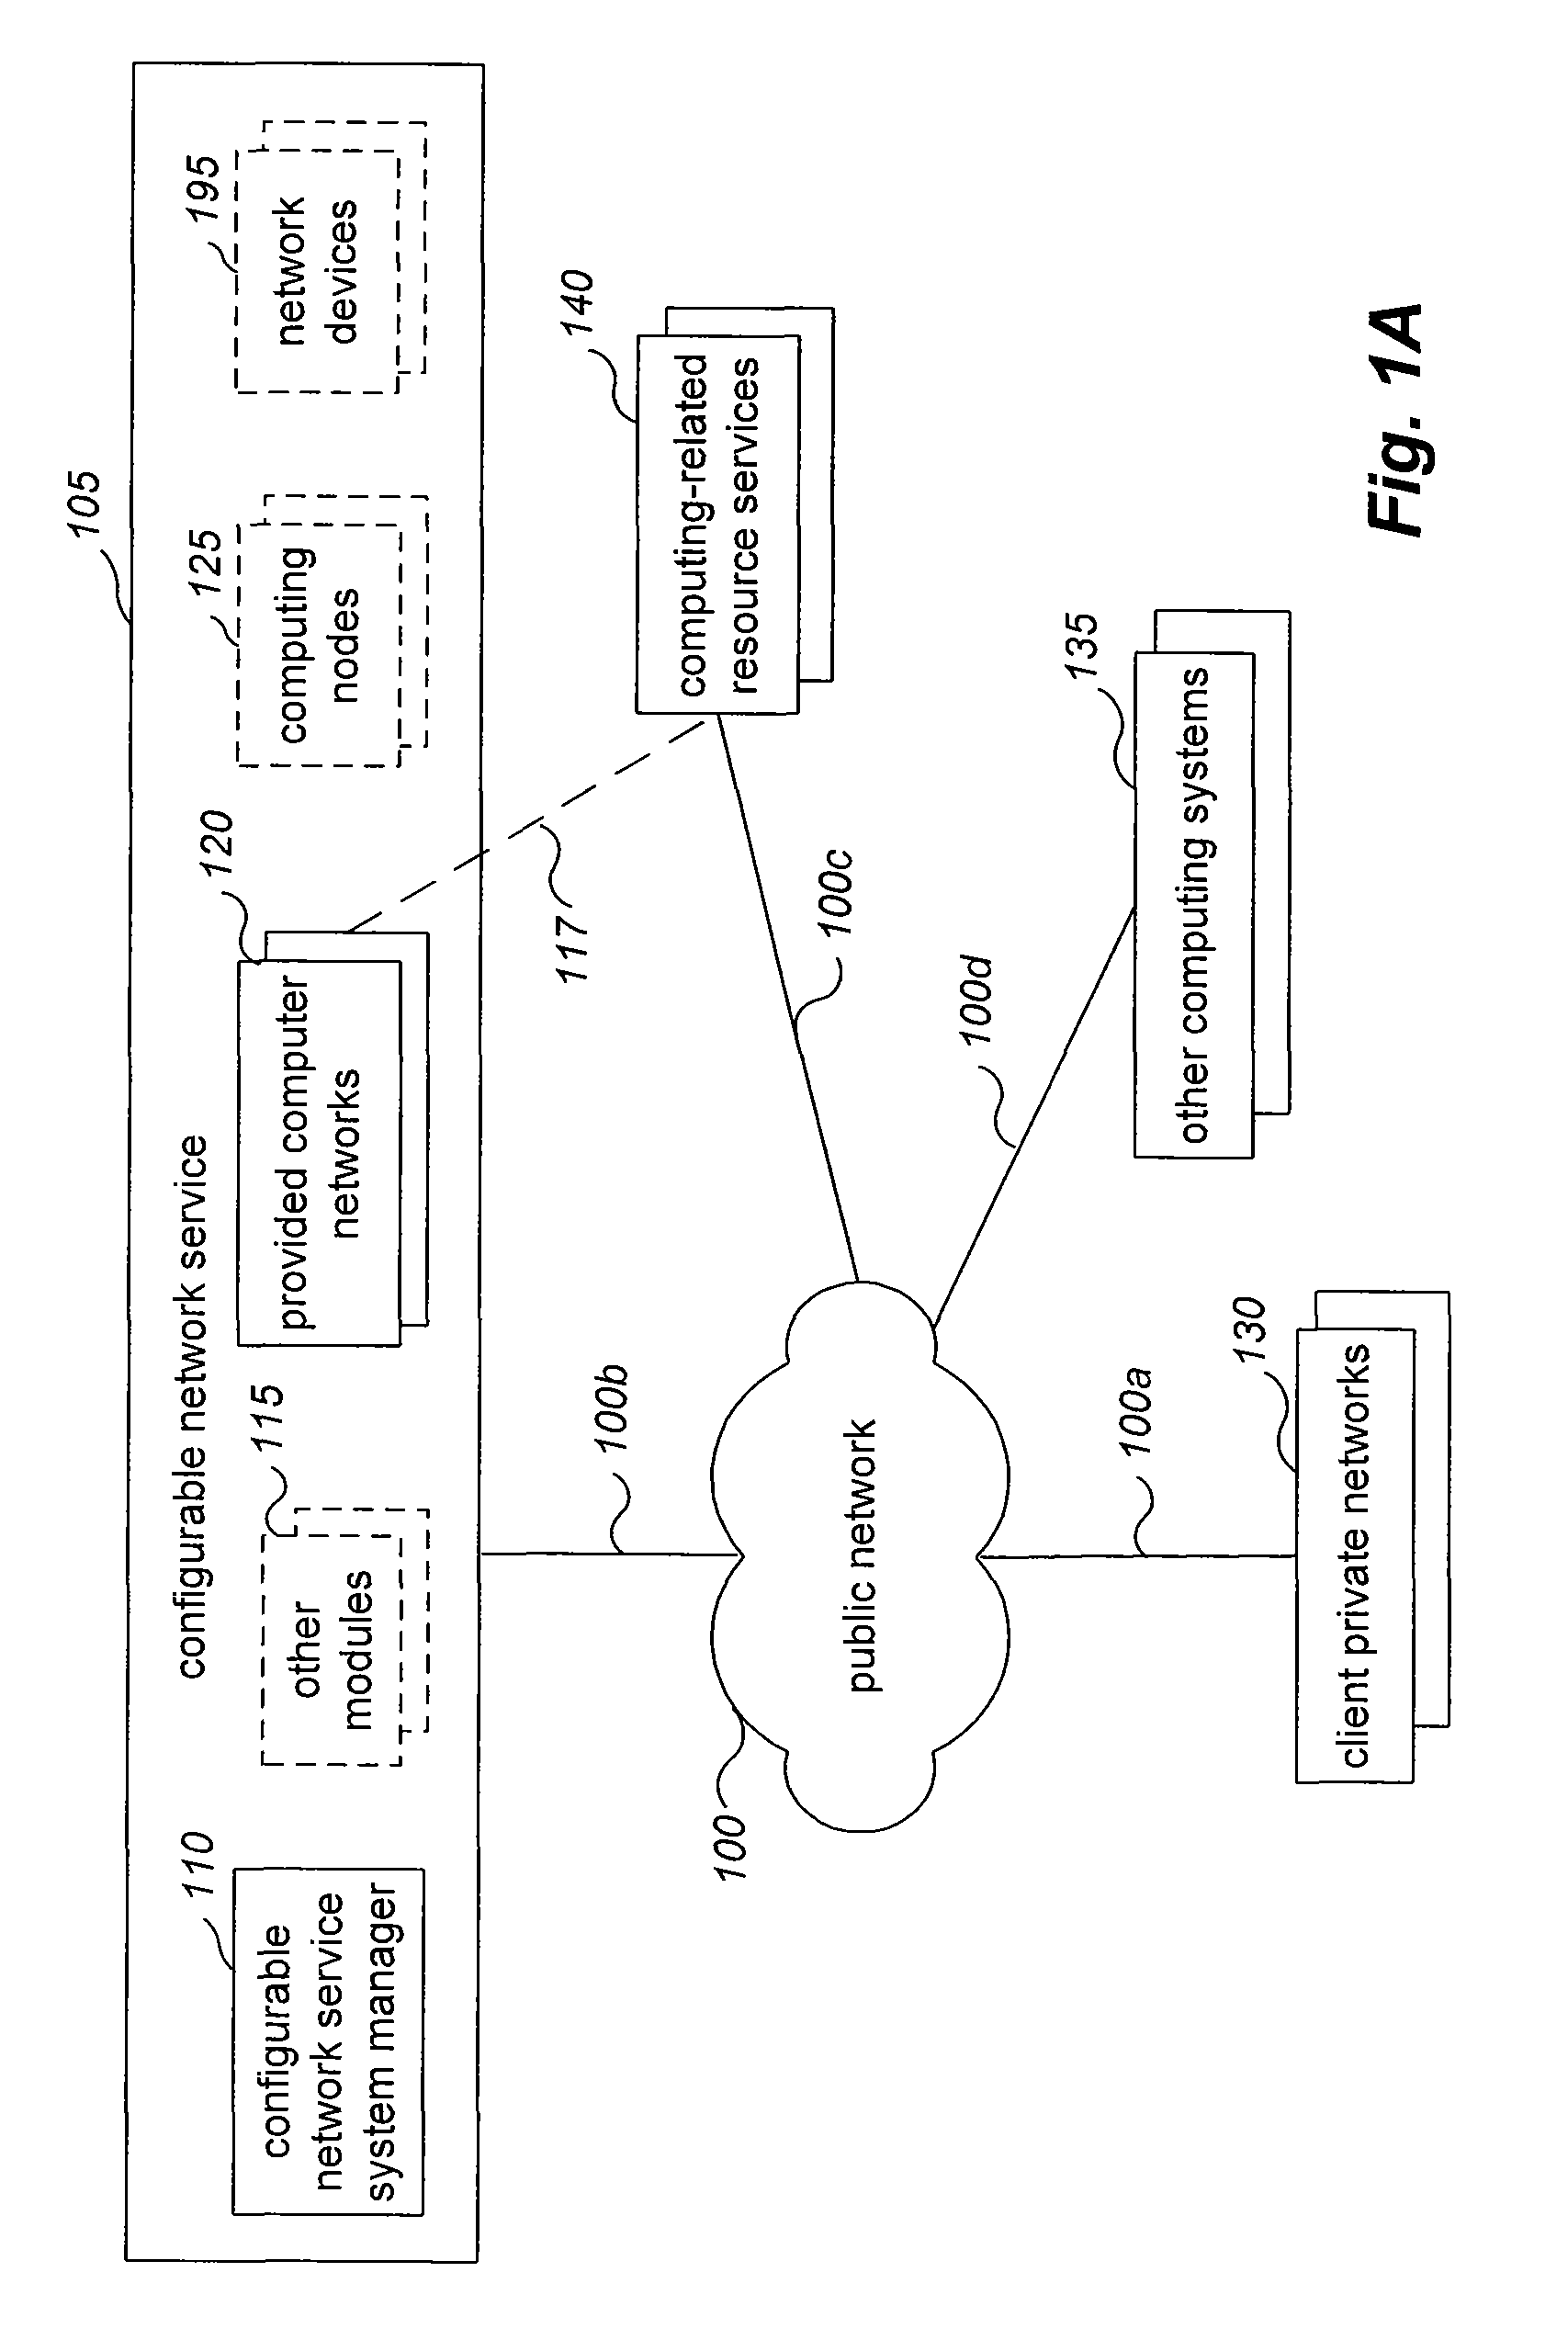 Managing external communications for provided computer networks